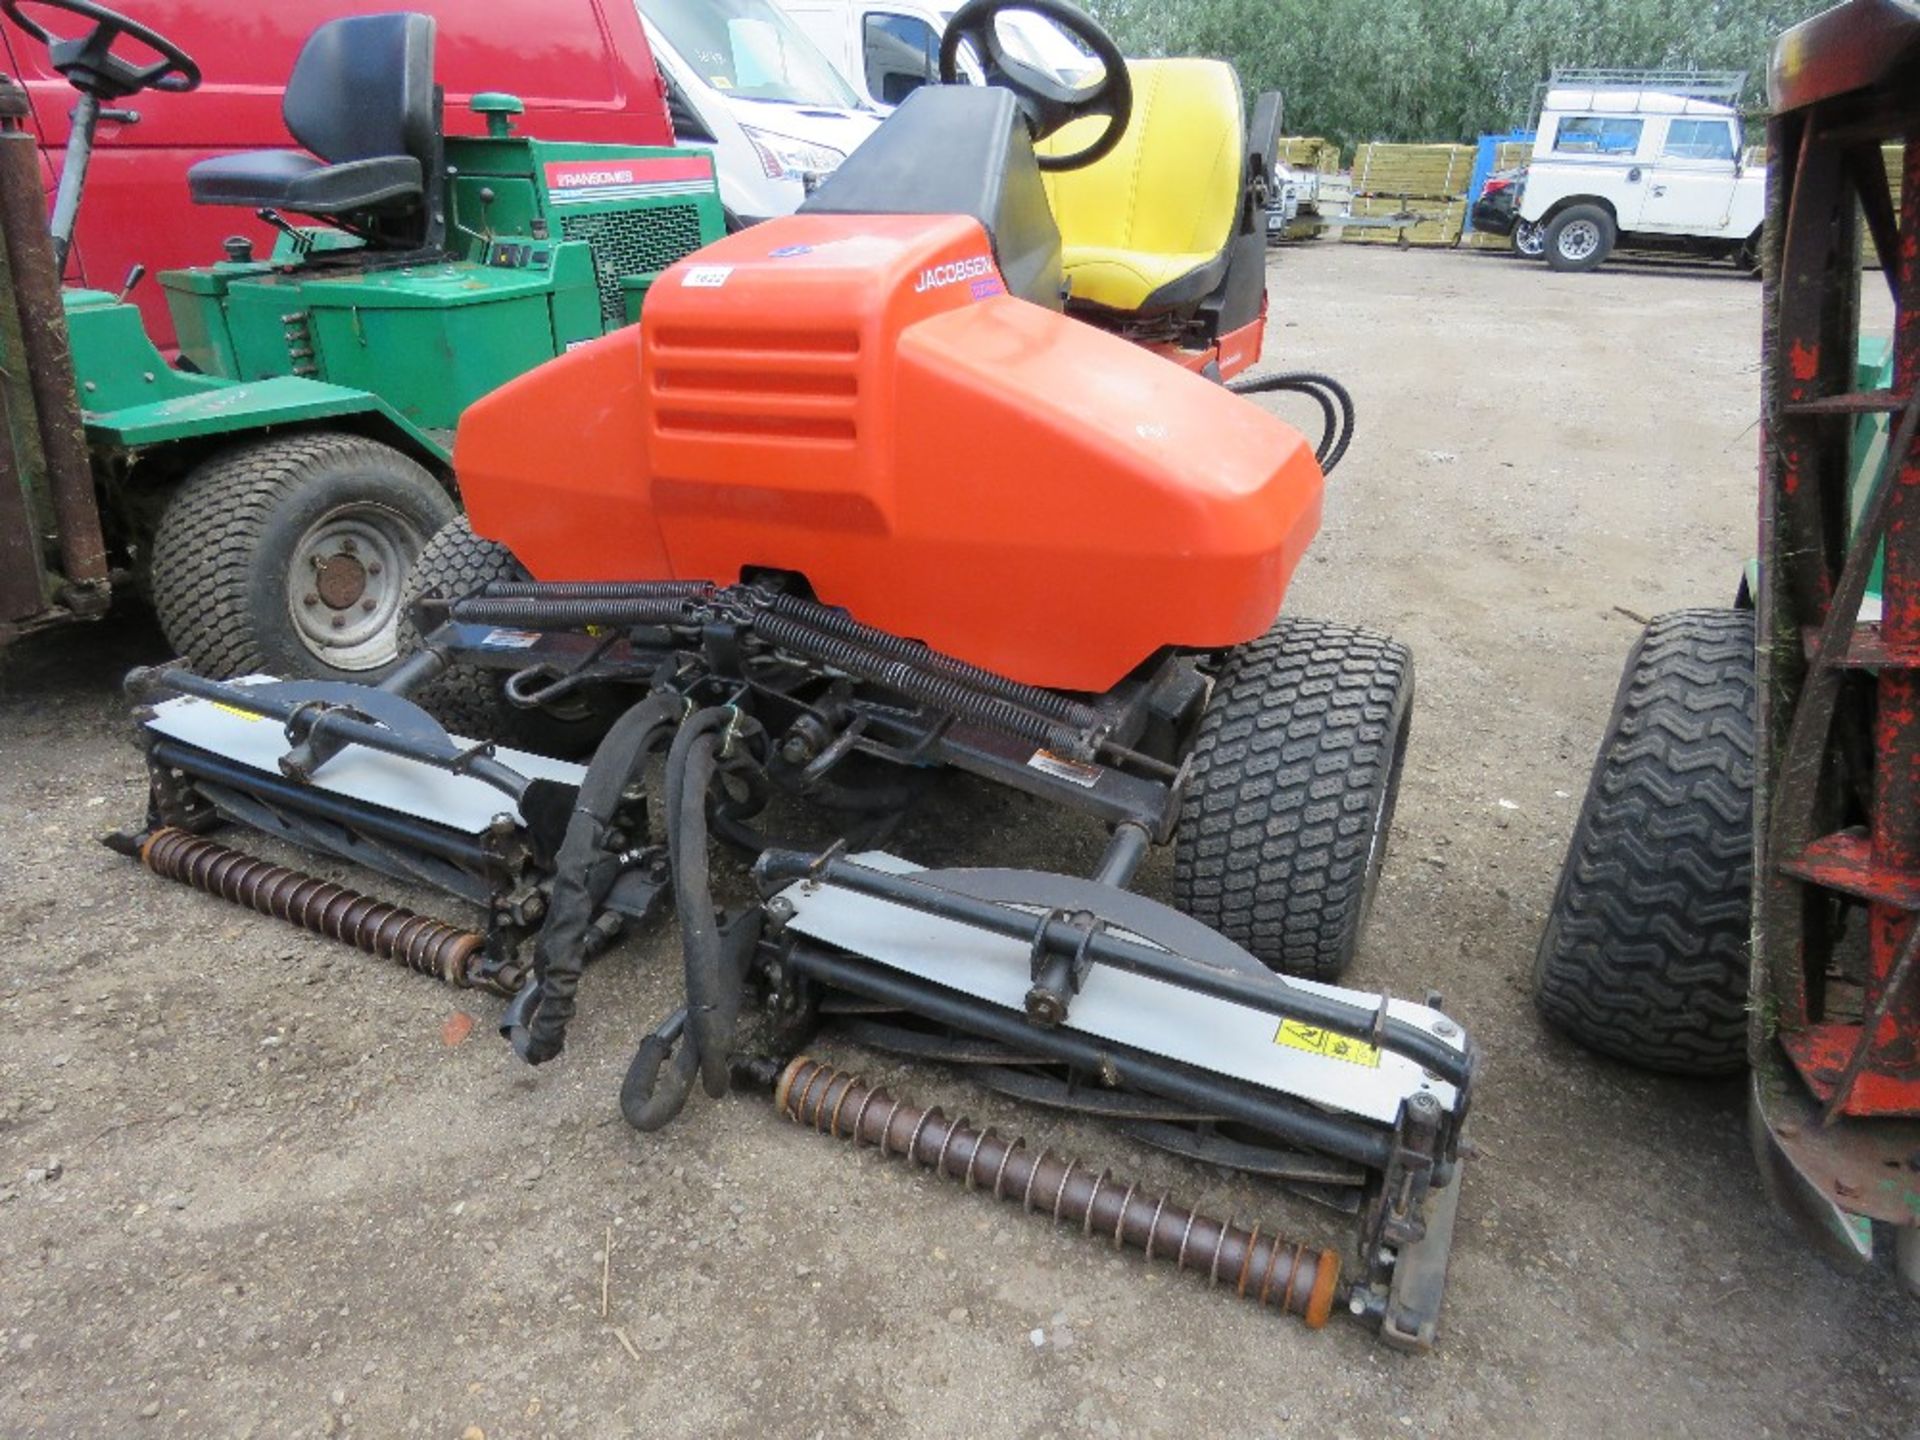 JACOBSEN TRIPLE RIDE ON GREENS MOWER 2545 REC HOURS. WHEN TESTED WAS SEEN TO RUN, DRIVE AND MOWERS T - Image 3 of 8